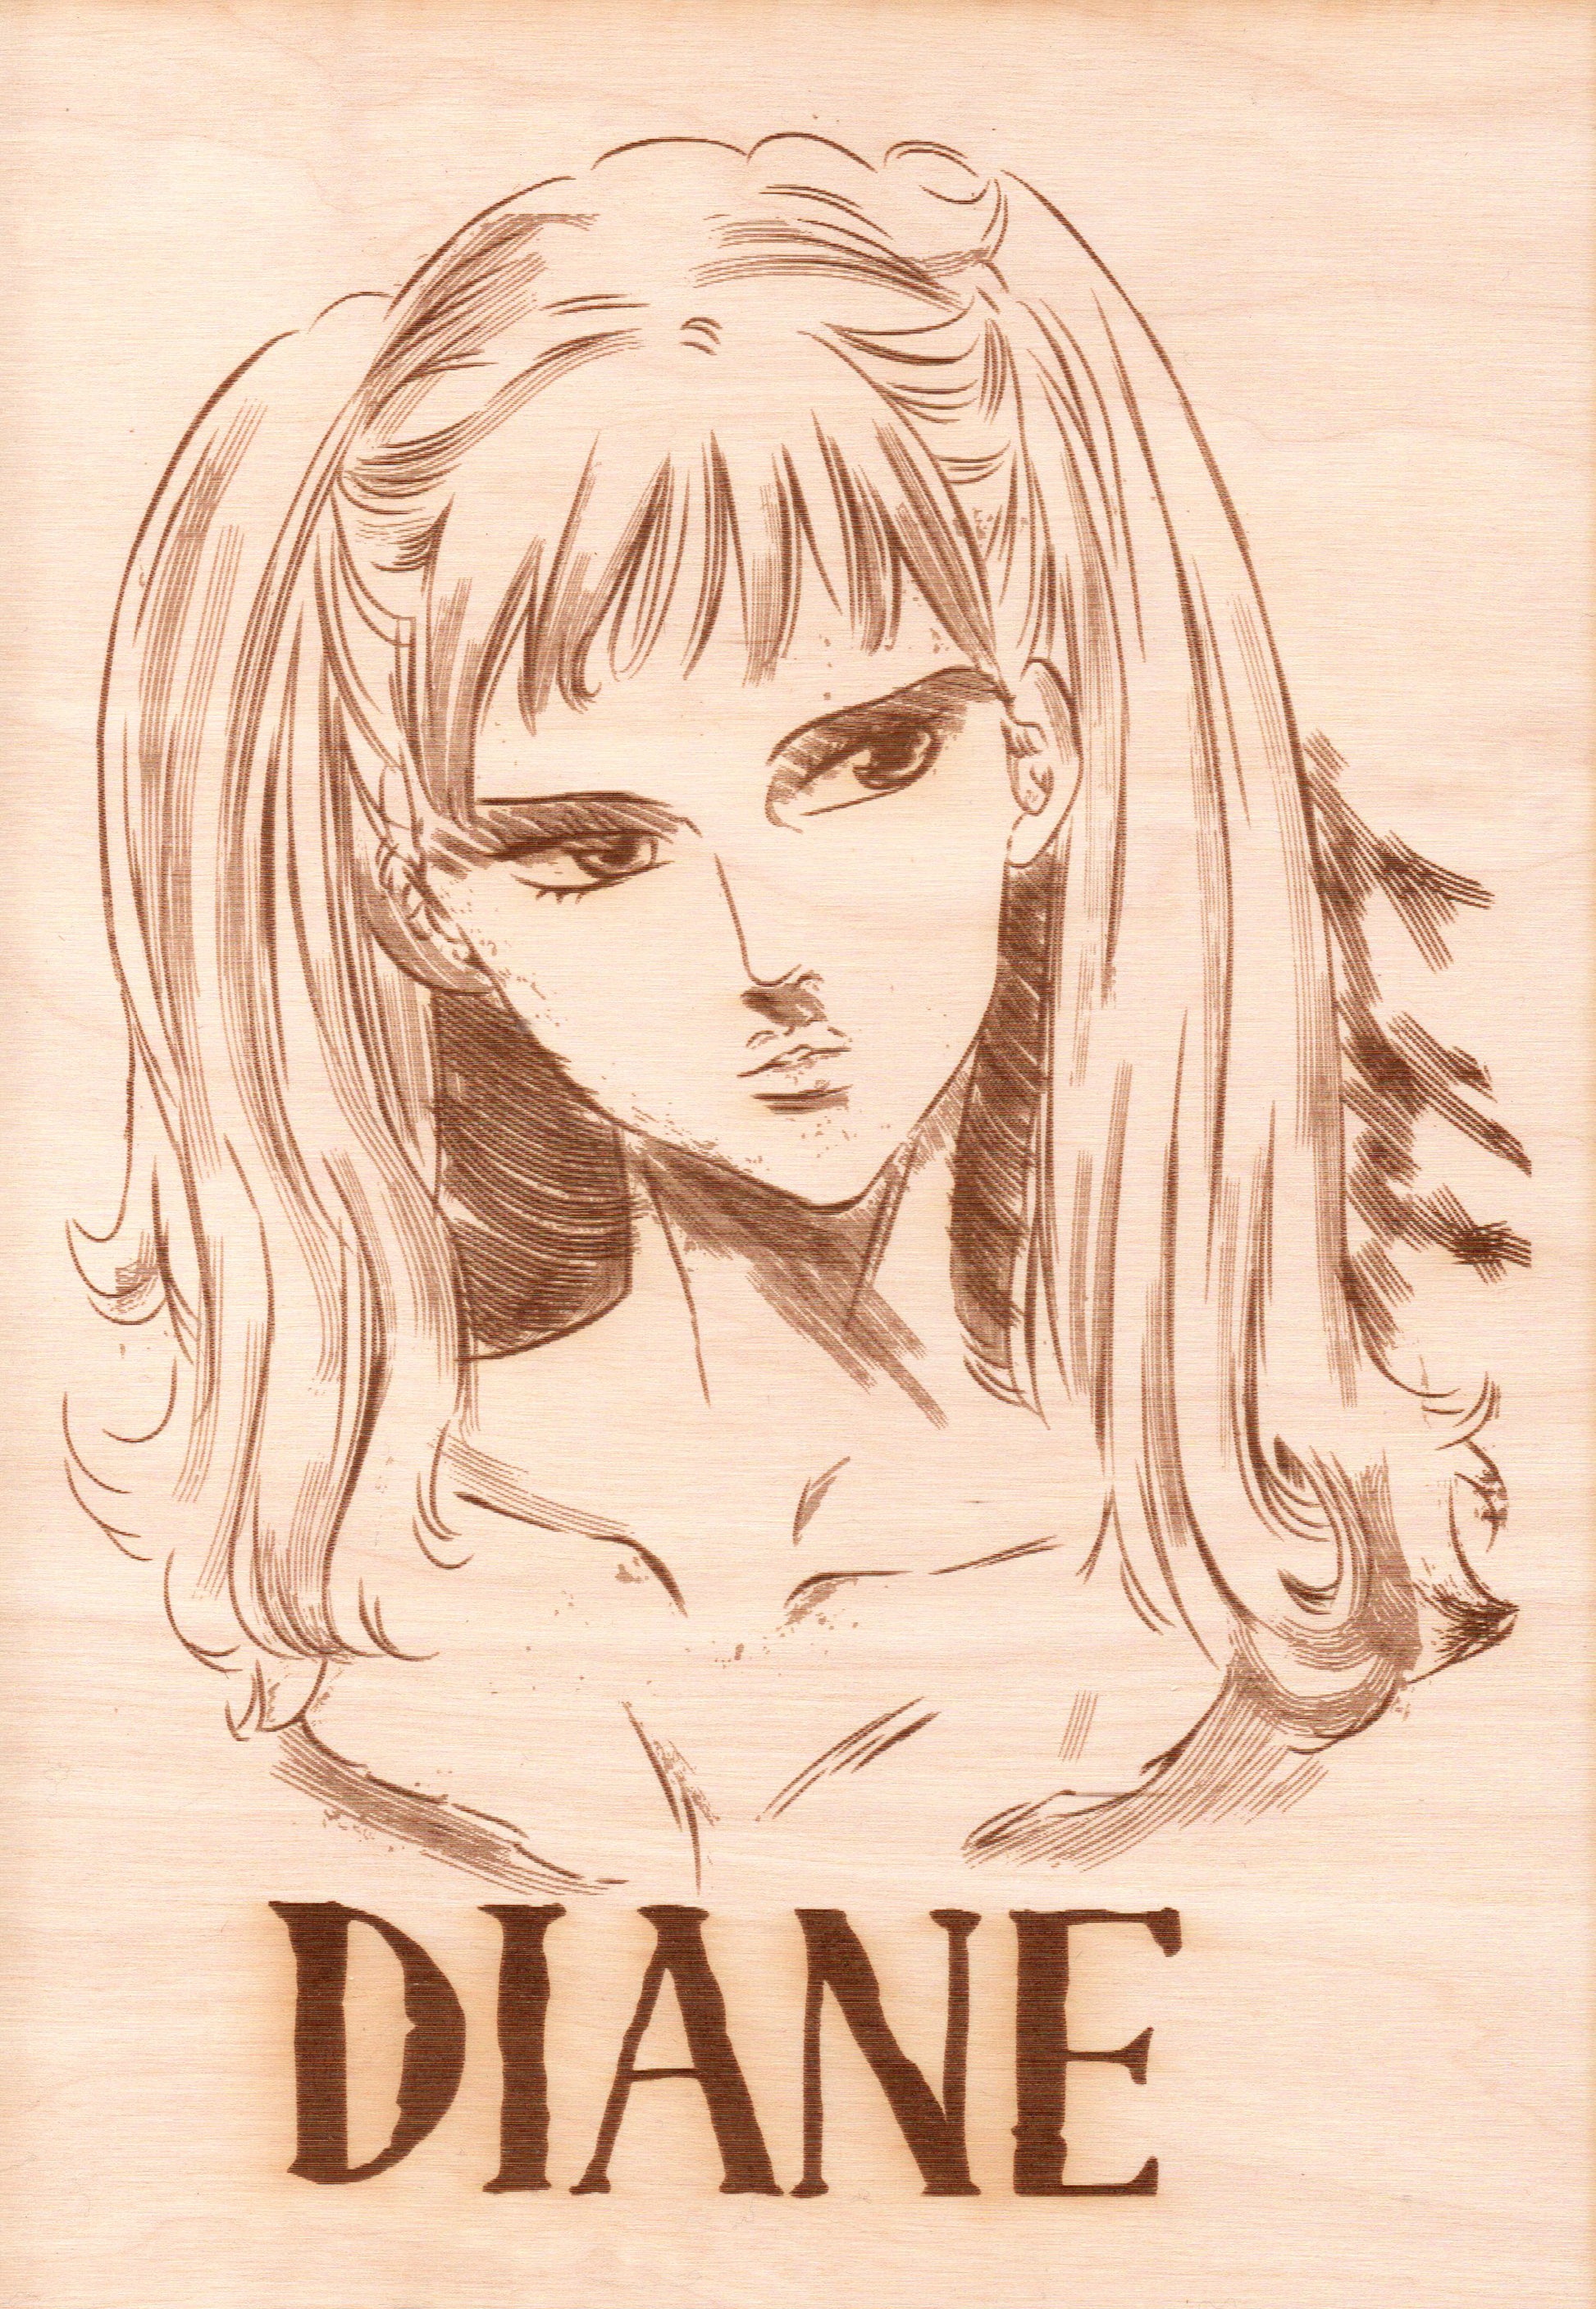 Seven Deadly Sins - Diane Wooden Wanted Poster - TantrumCollectibles.com